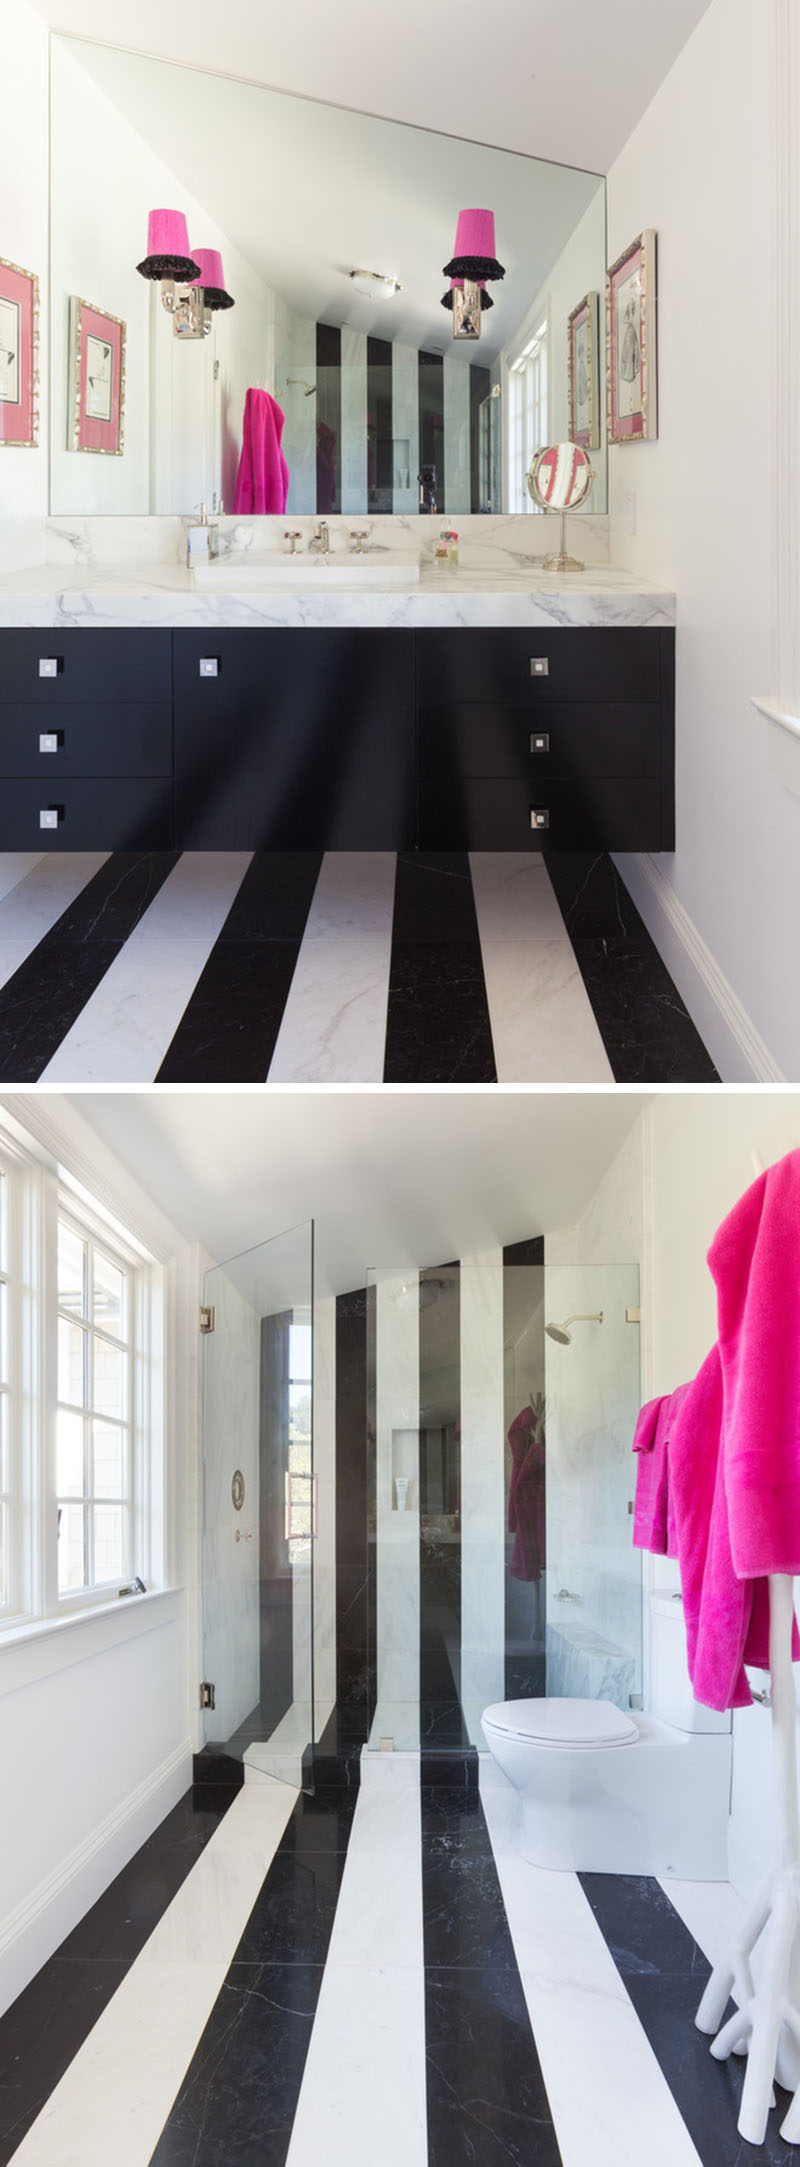 7 Examples Of Striped Floors In Contemporary Homes // The black and white striped flooring in this bathroom travels from under the vanity, across the floor, and up into the wall of the shower.